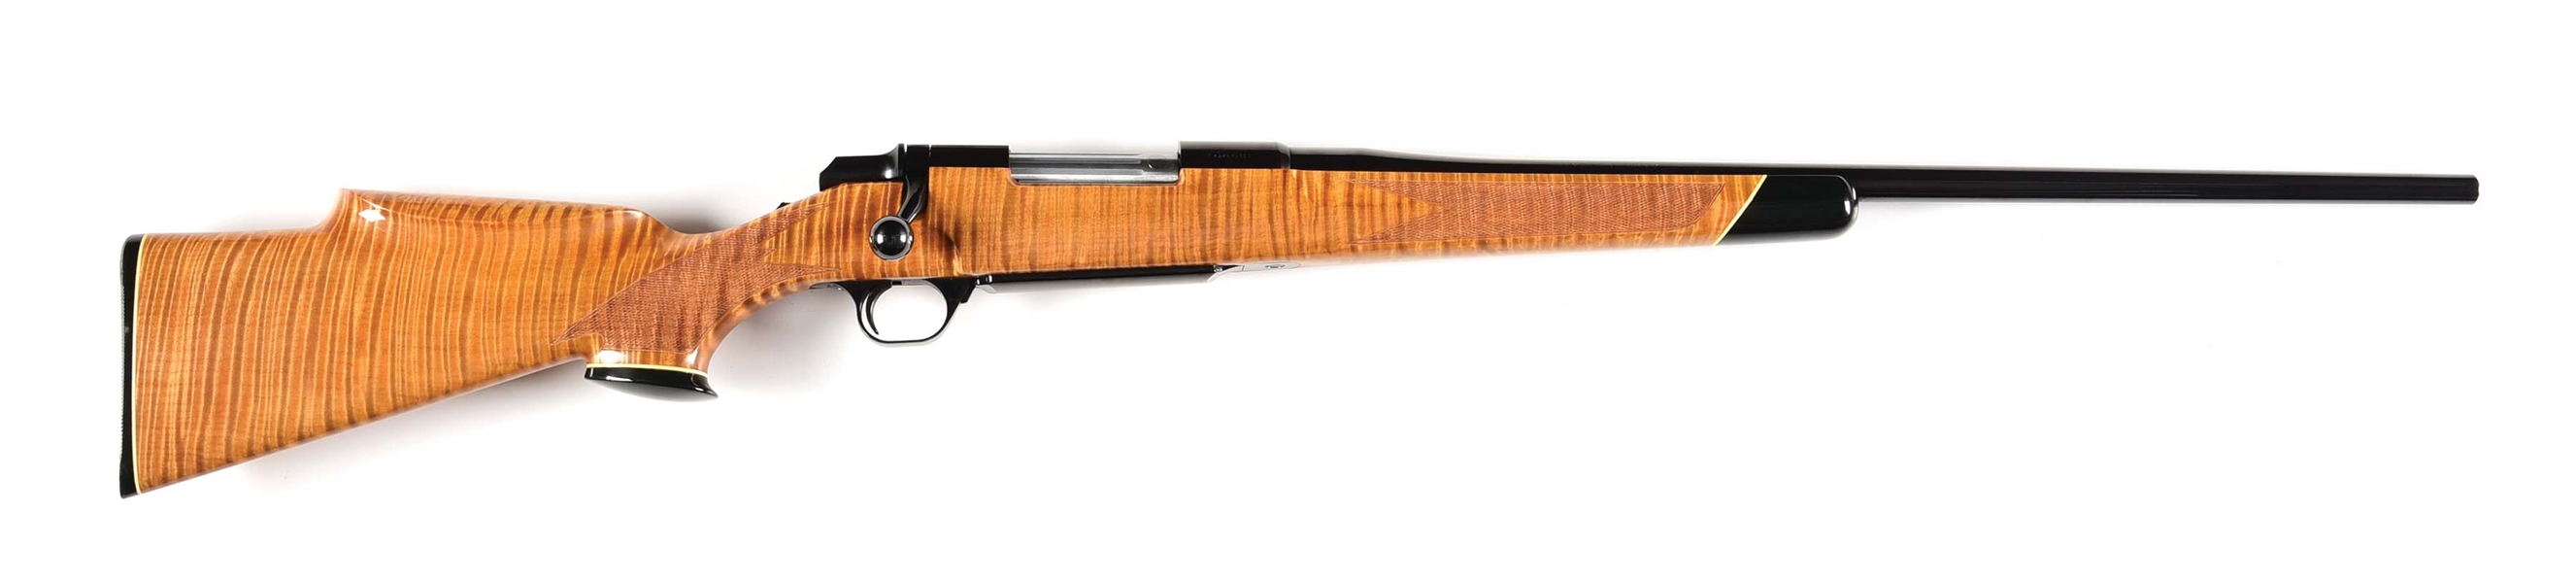 (M) FIDDLE BACK MAPLE STOCKED BROWNING BBR BOLT ACTION RIFLE.